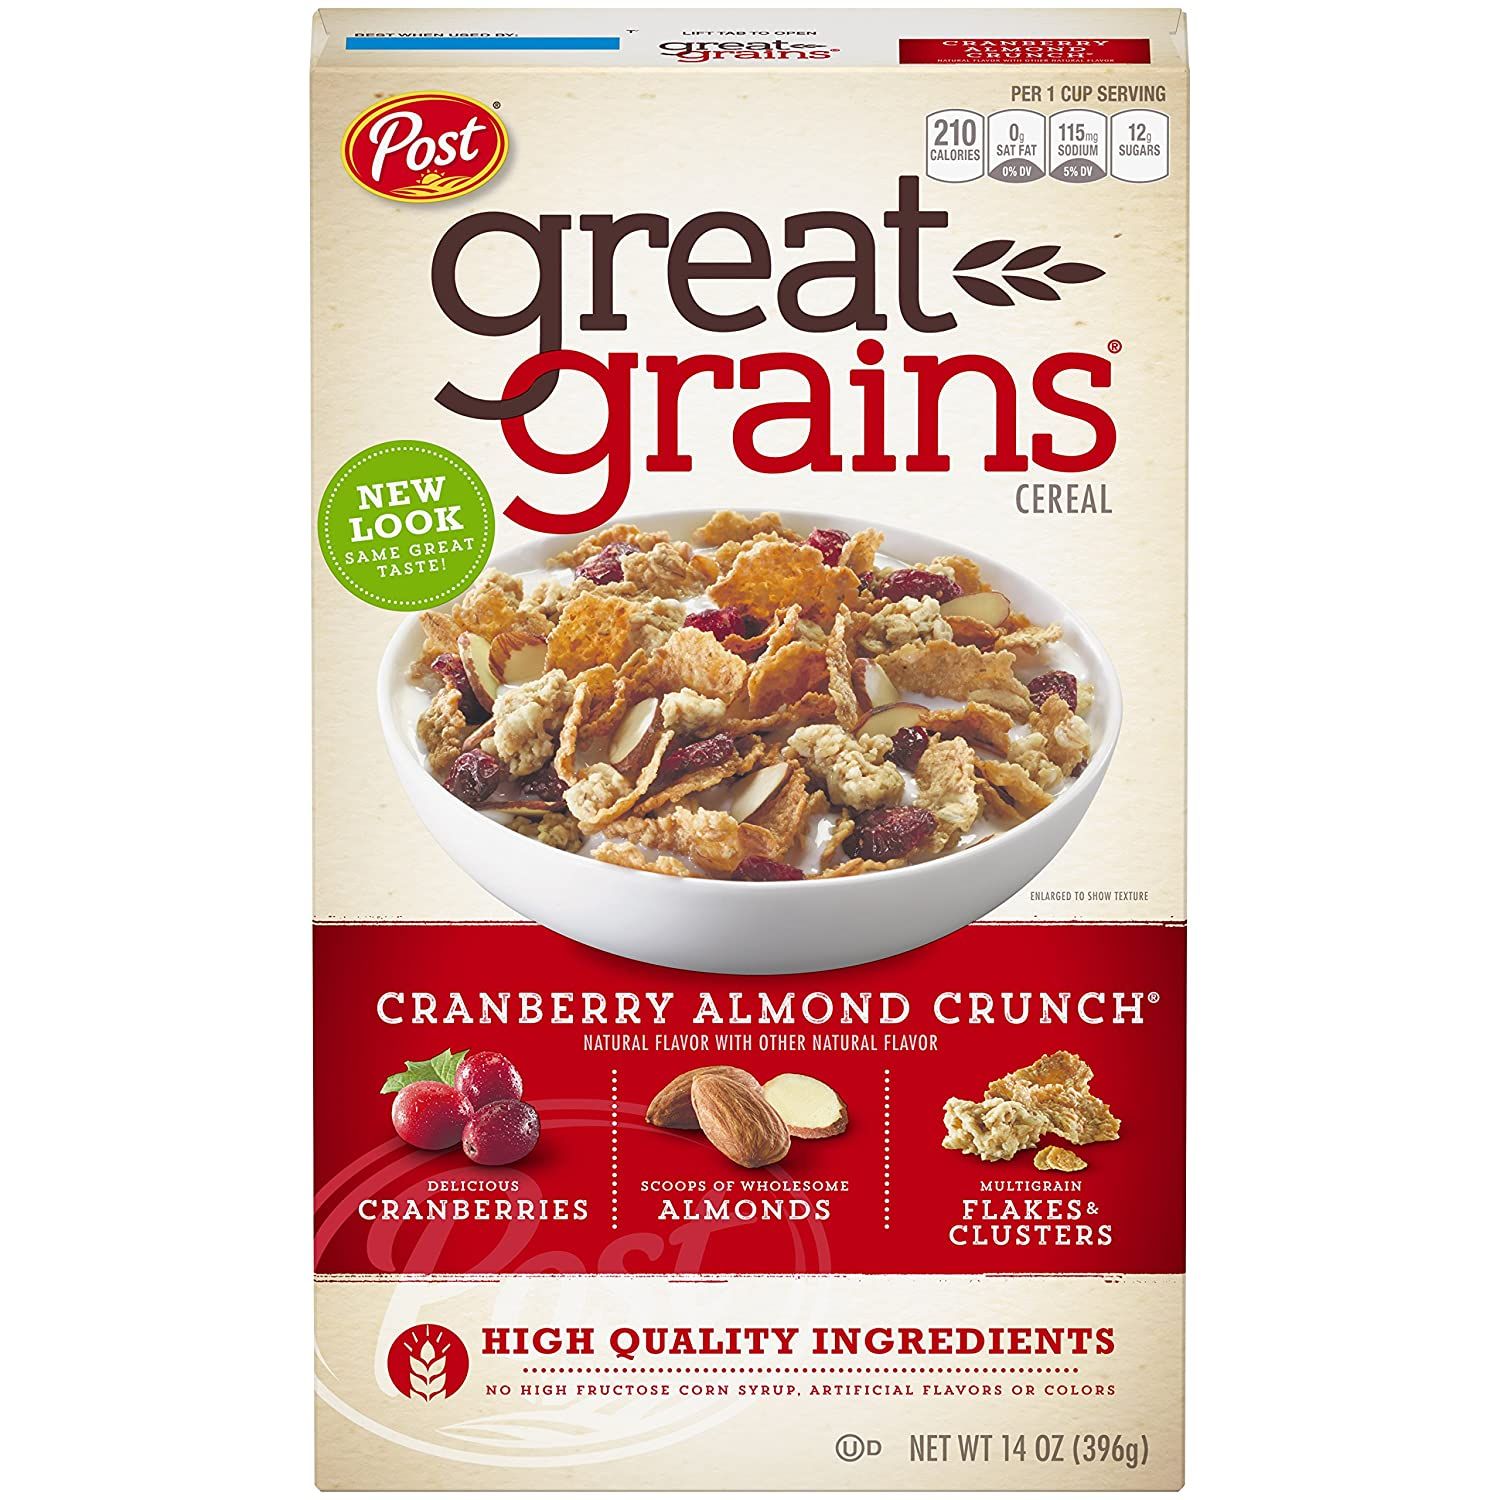 Post Great Grains Cranberry Almond Crunch Cereal Image